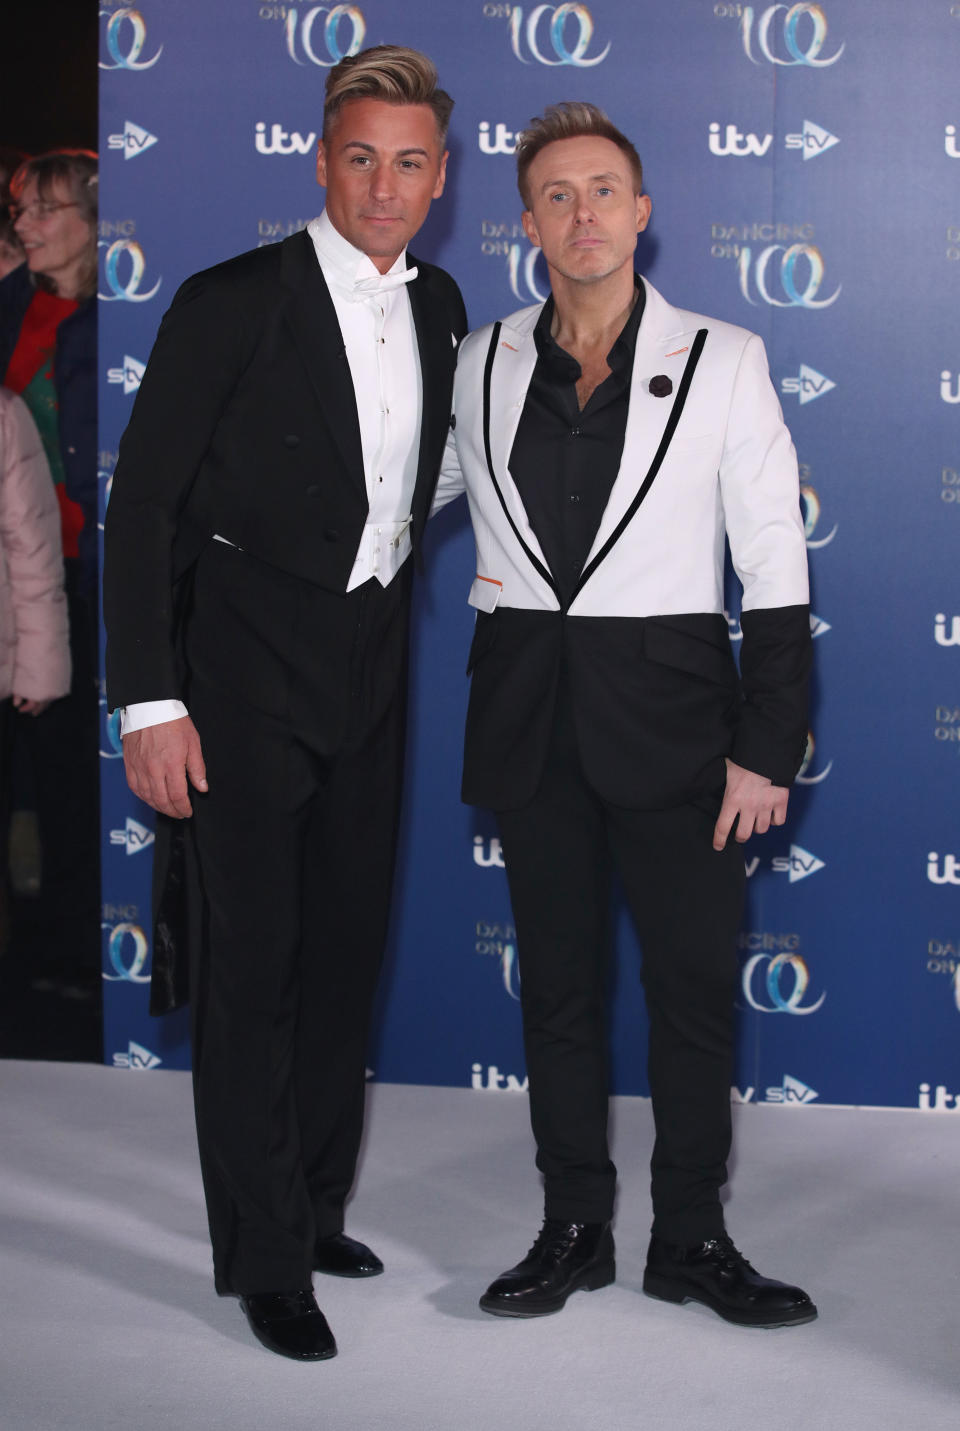 Ian Watkins and Matt Evers during the Dancing On Ice 2019 photocall at ITV Studios on December 09, 2019 in London, England. (Photo by Mike Marsland/WireImage)